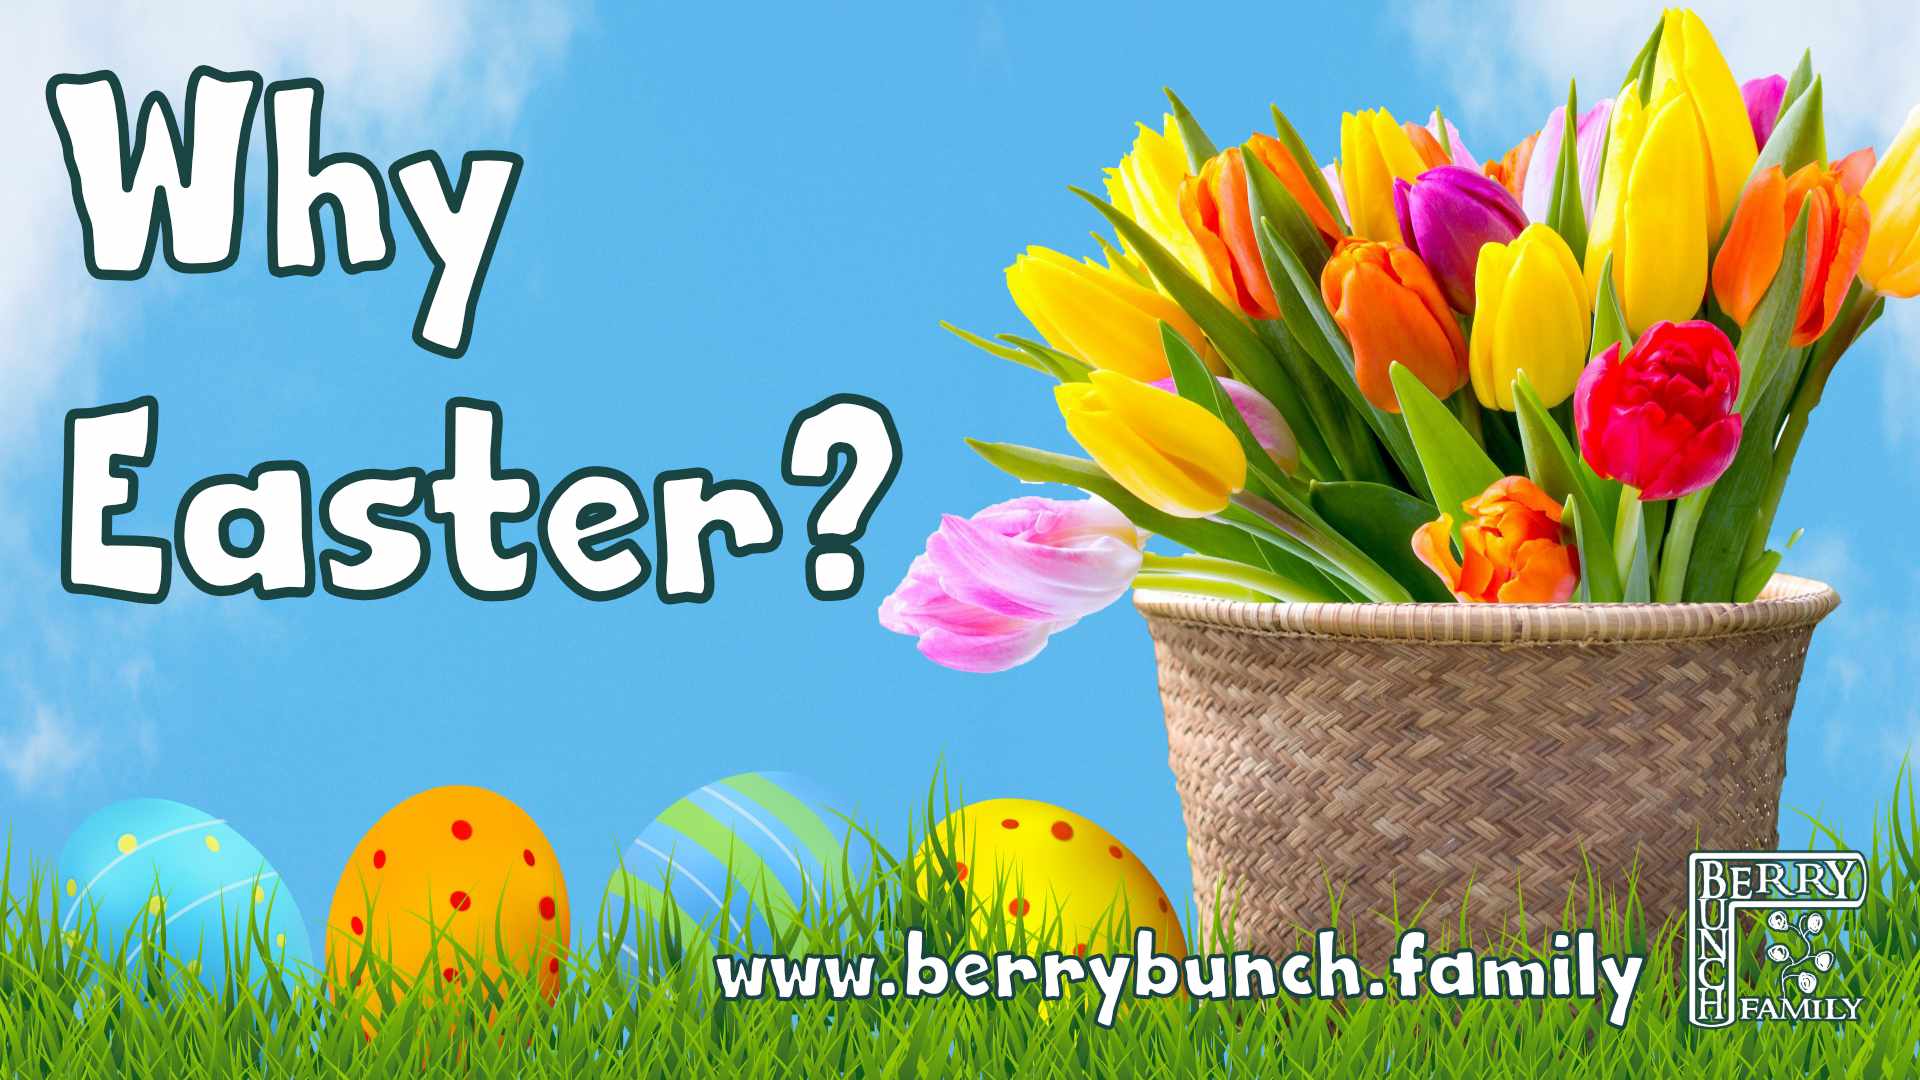 Why Easter, flash image